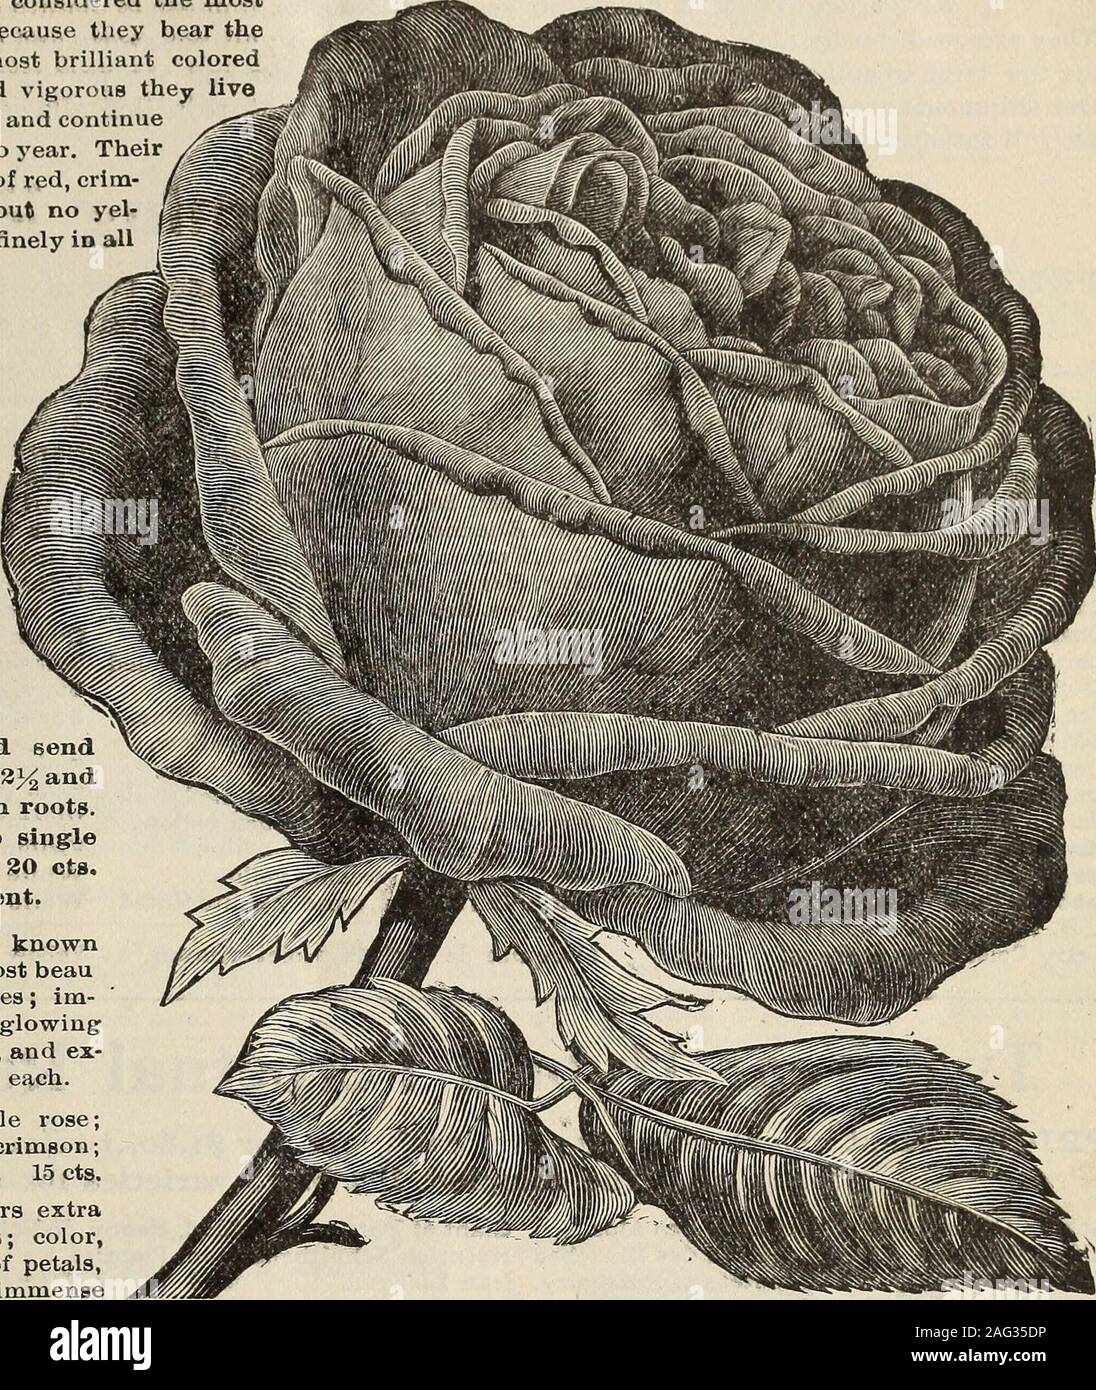 New floral guide : 1899 plain abridged edition. MEREU—Large full flowers;  color, pure white; a good grower and free bloomer. 15 cts.CAROLINE DE  SANSEL—Clear bright rose, passing to rosy lilac, edged